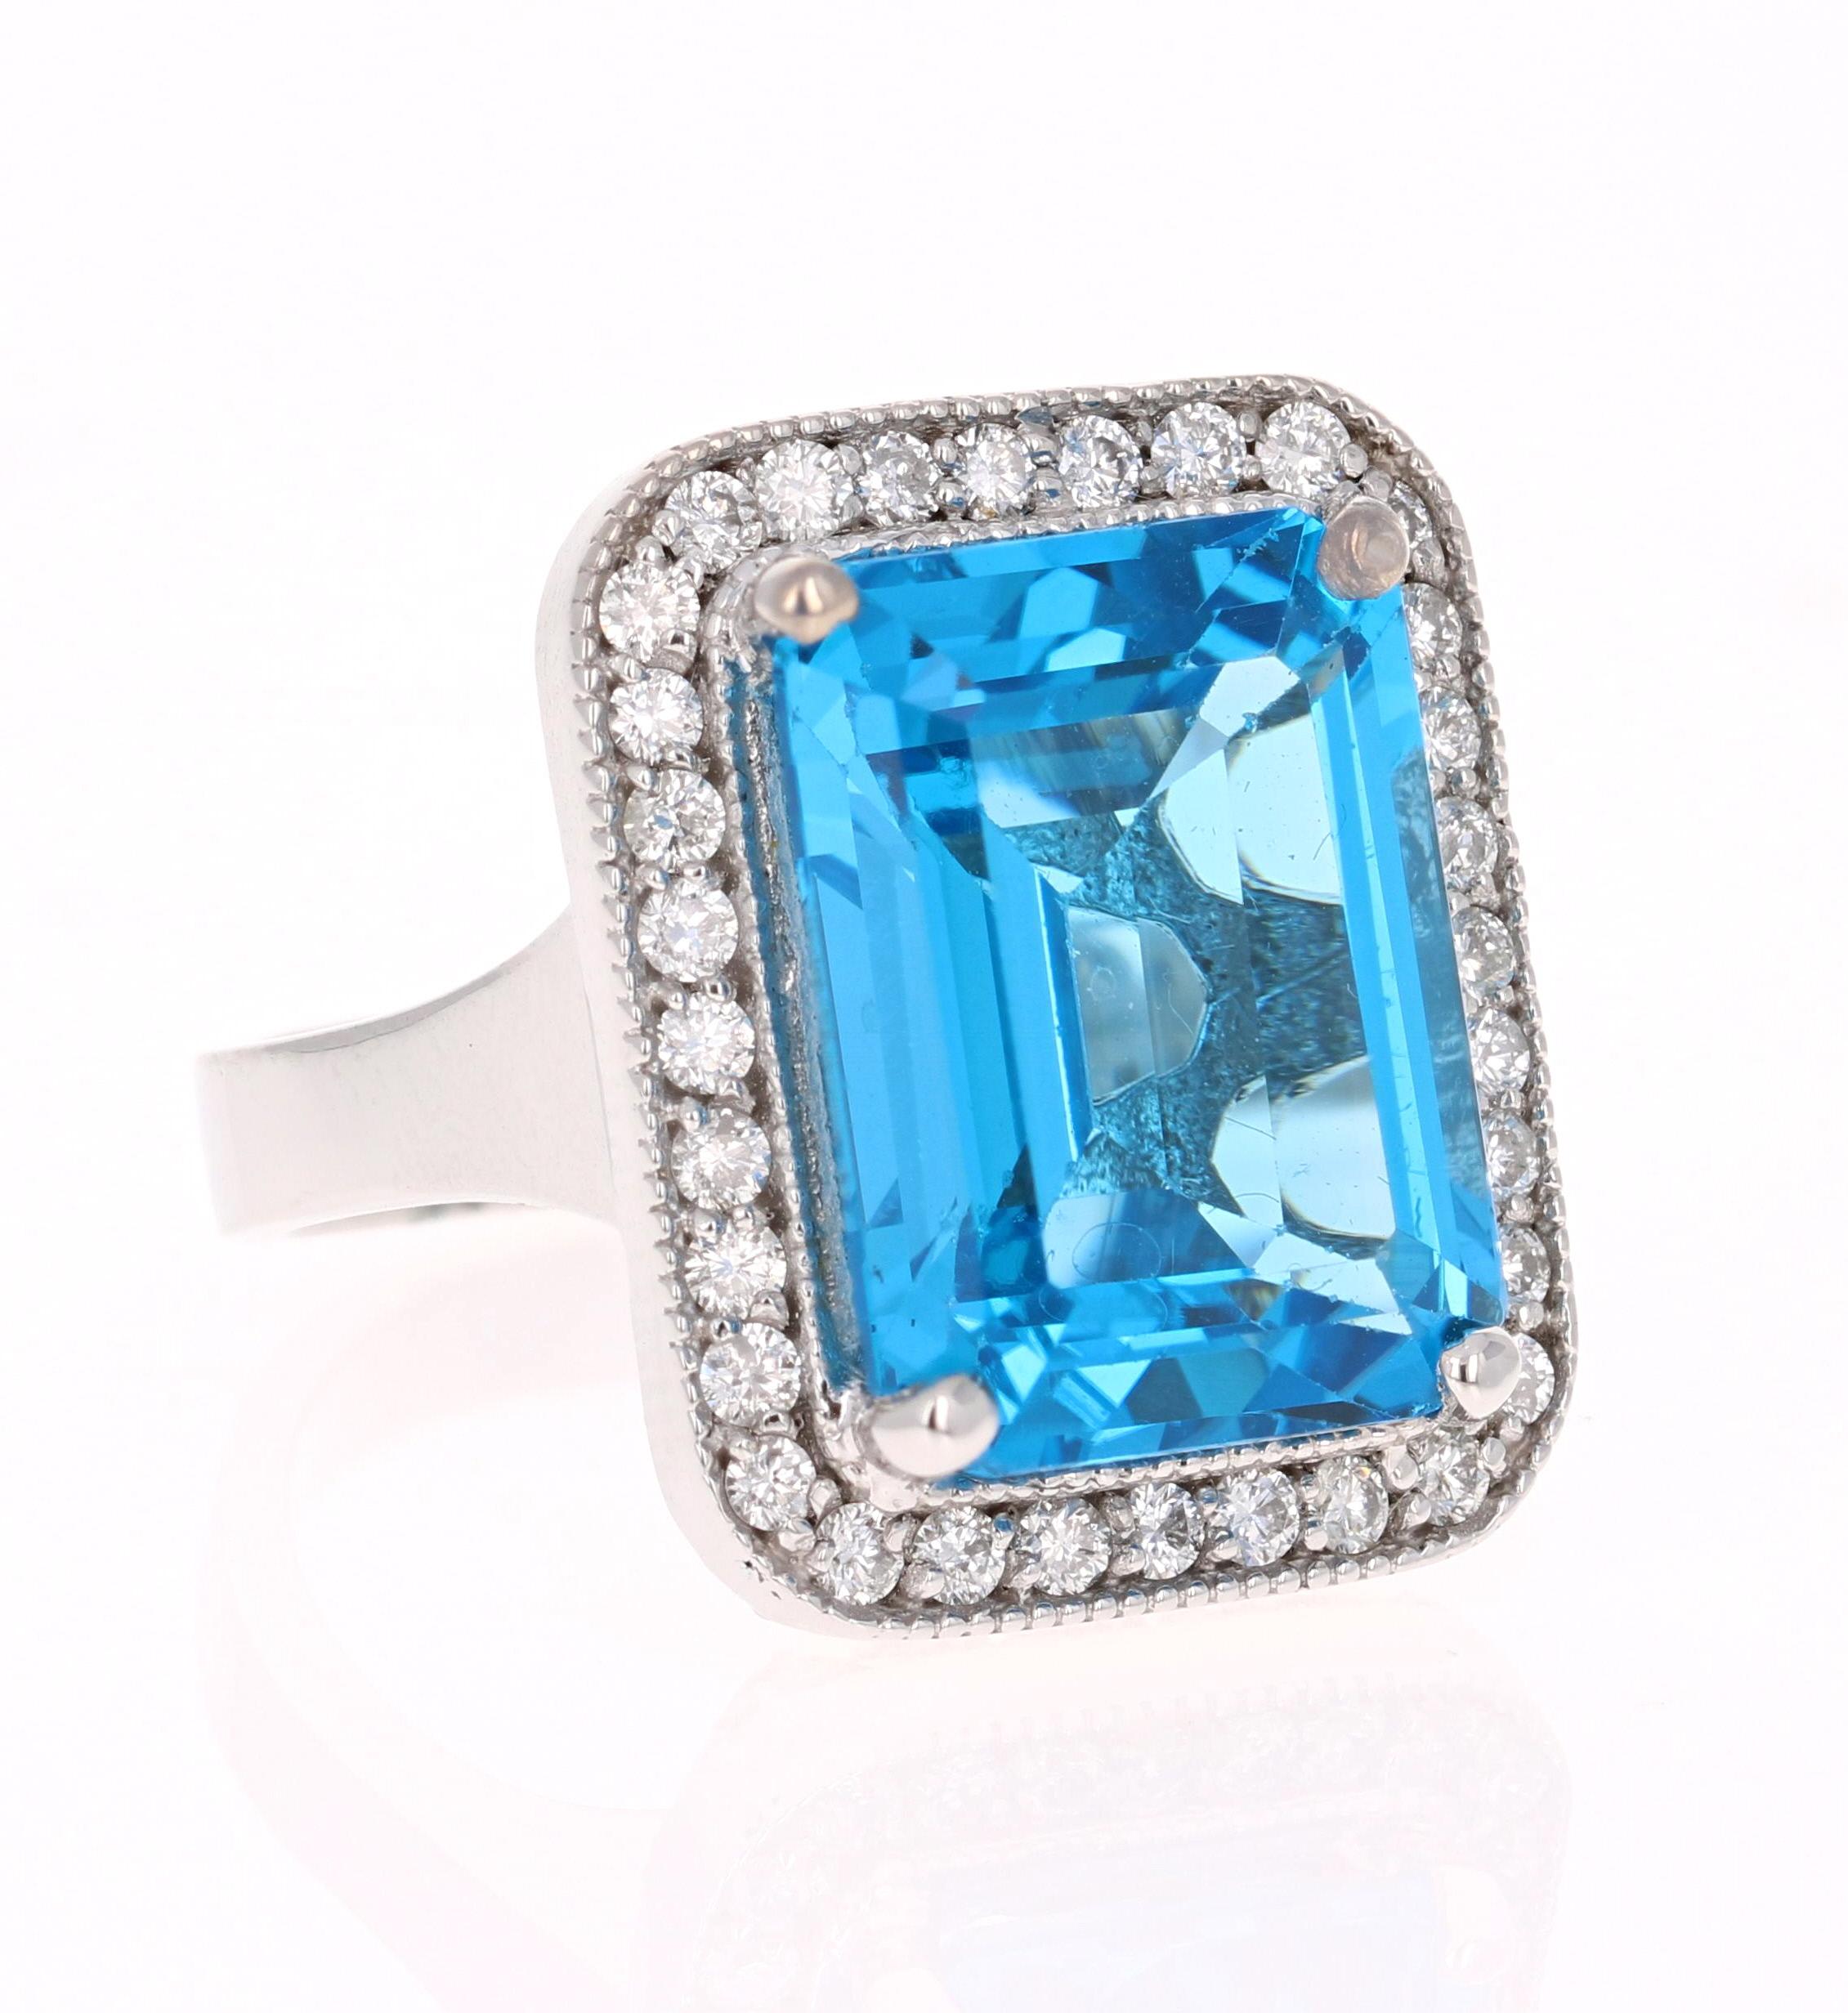 This stunning statement ring has a large Emerald Cut Blue Topaz that weighs 13.94 Carats. 
It is surrounded by a simple halo of 46 Round Cut Diamonds that weigh 1.11 Carats. 
The total carat weight of the ring is 15.05 Carats. 

It is crafted in 14